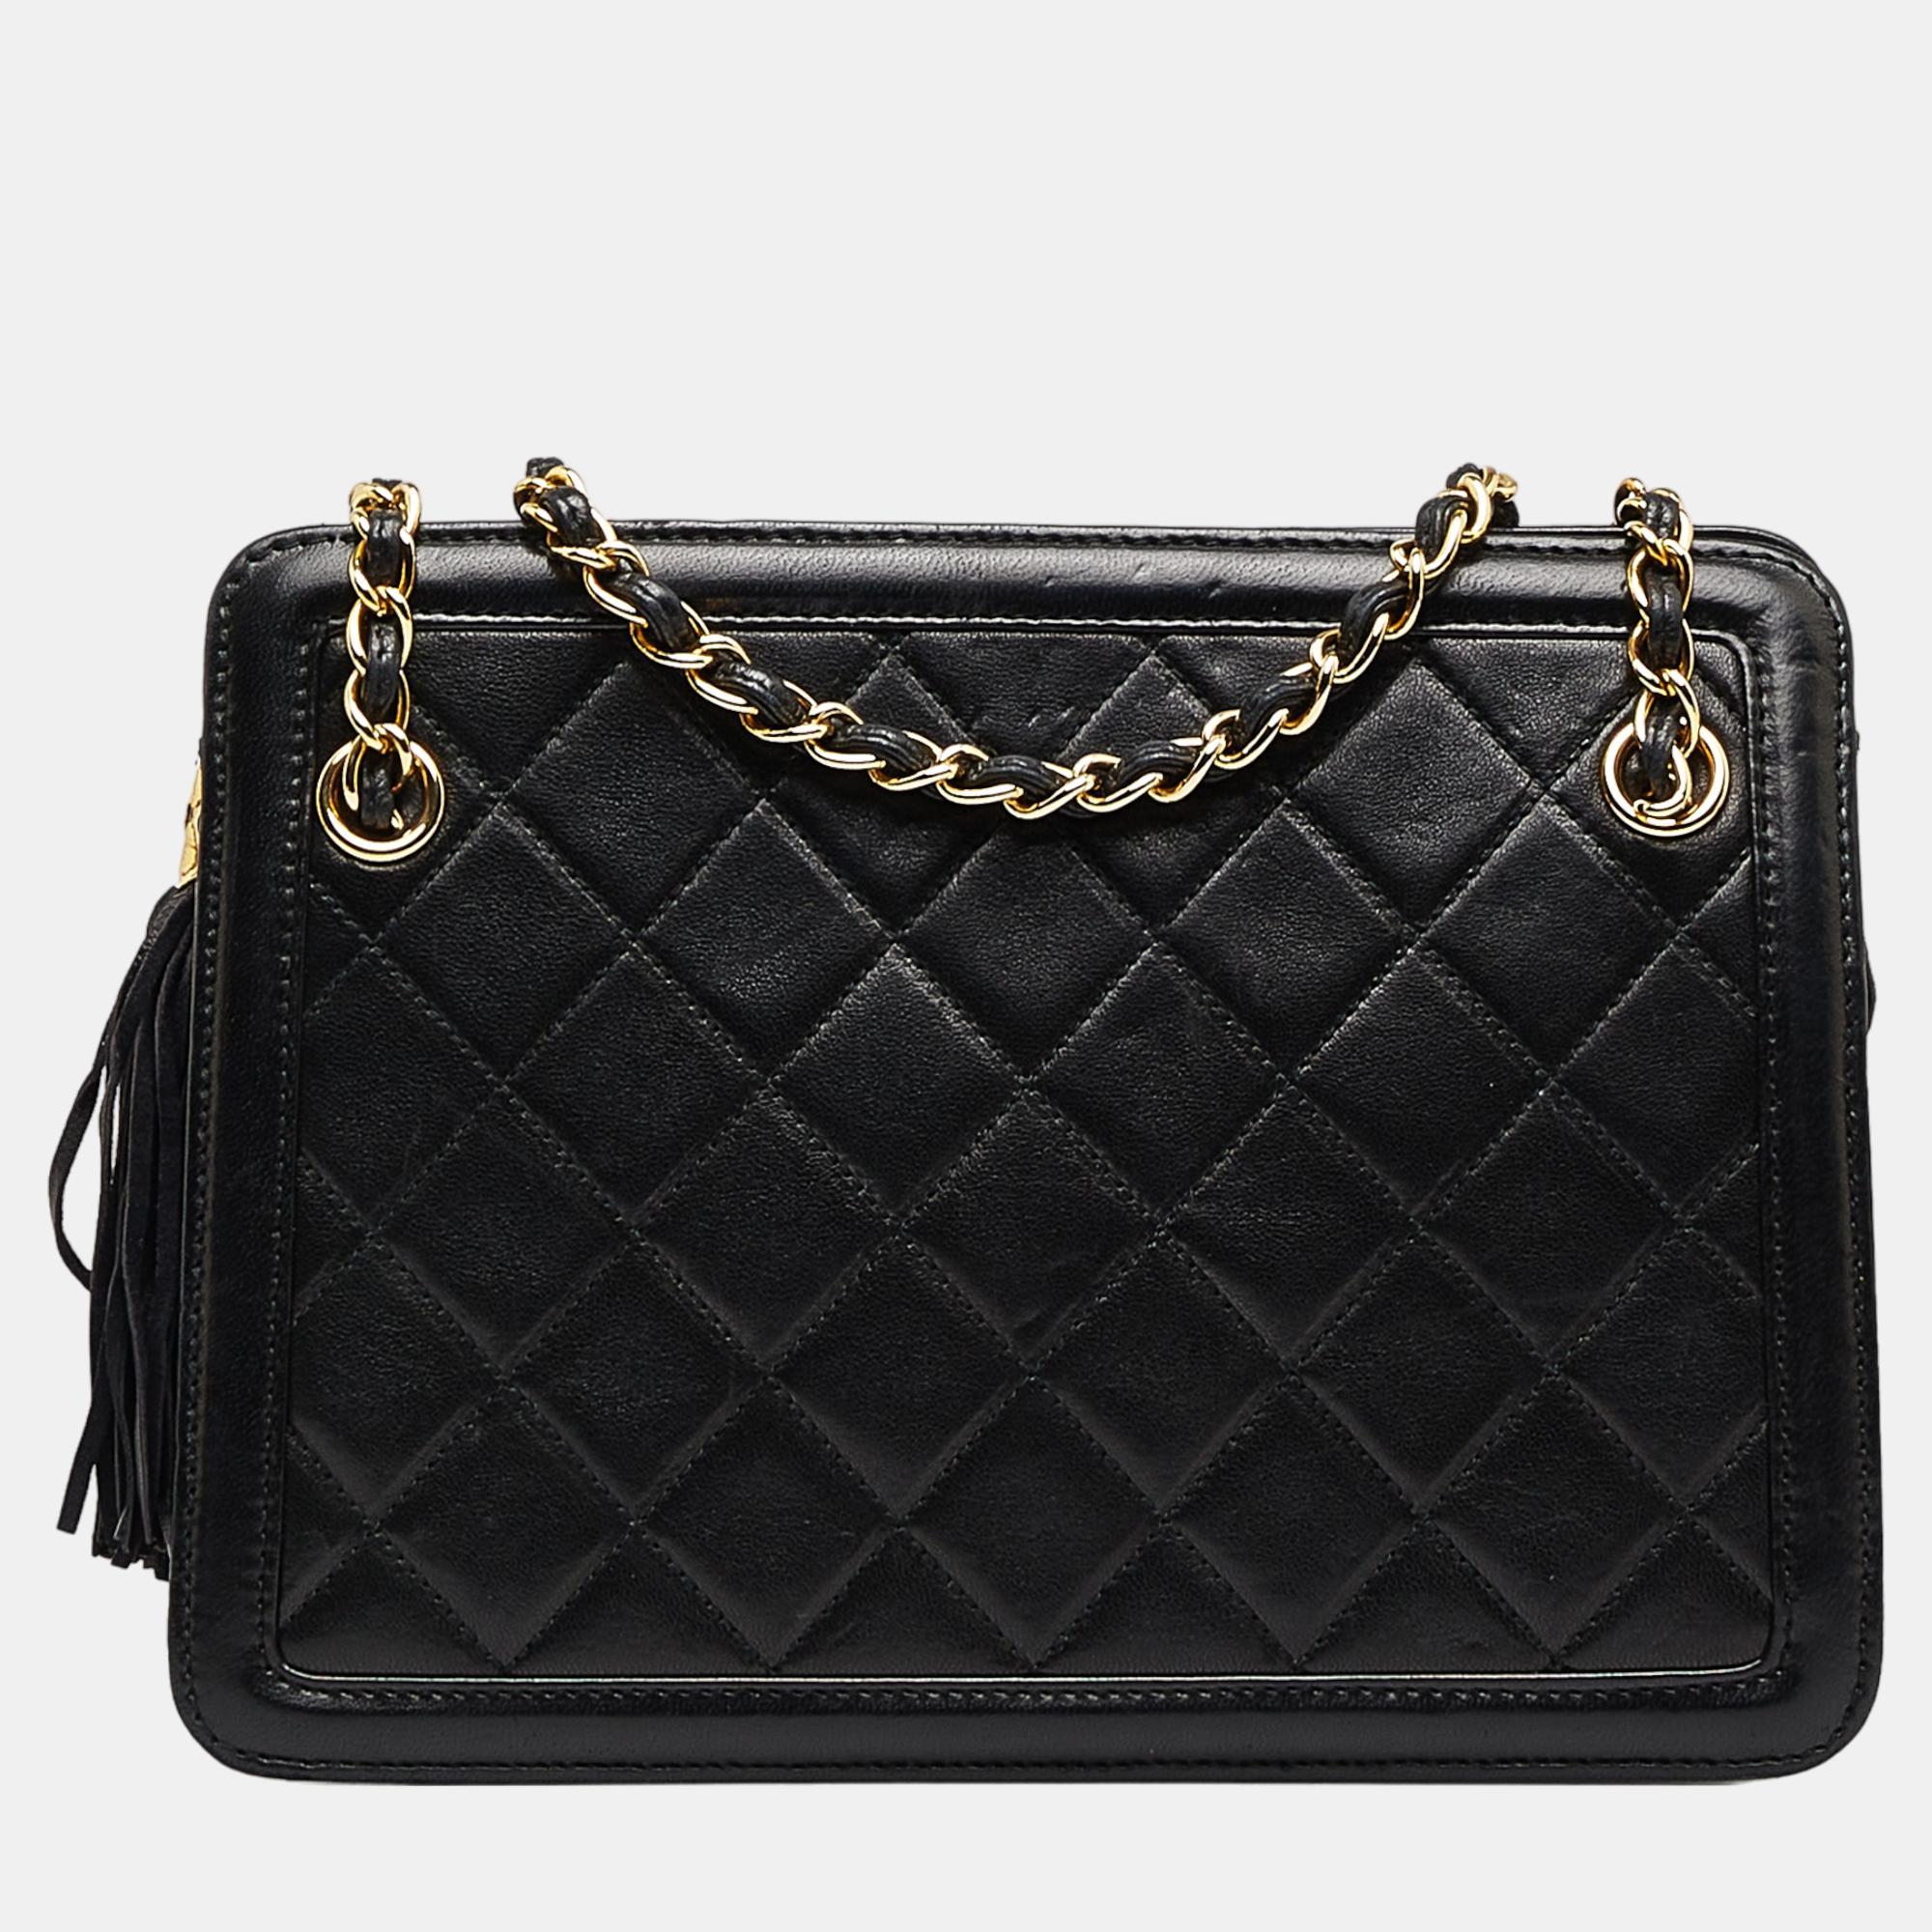 This shoulder bag features a quilted lambskin leather body with tassel detail leather woven chain straps a top zip closure and interior zip and slip pockets.